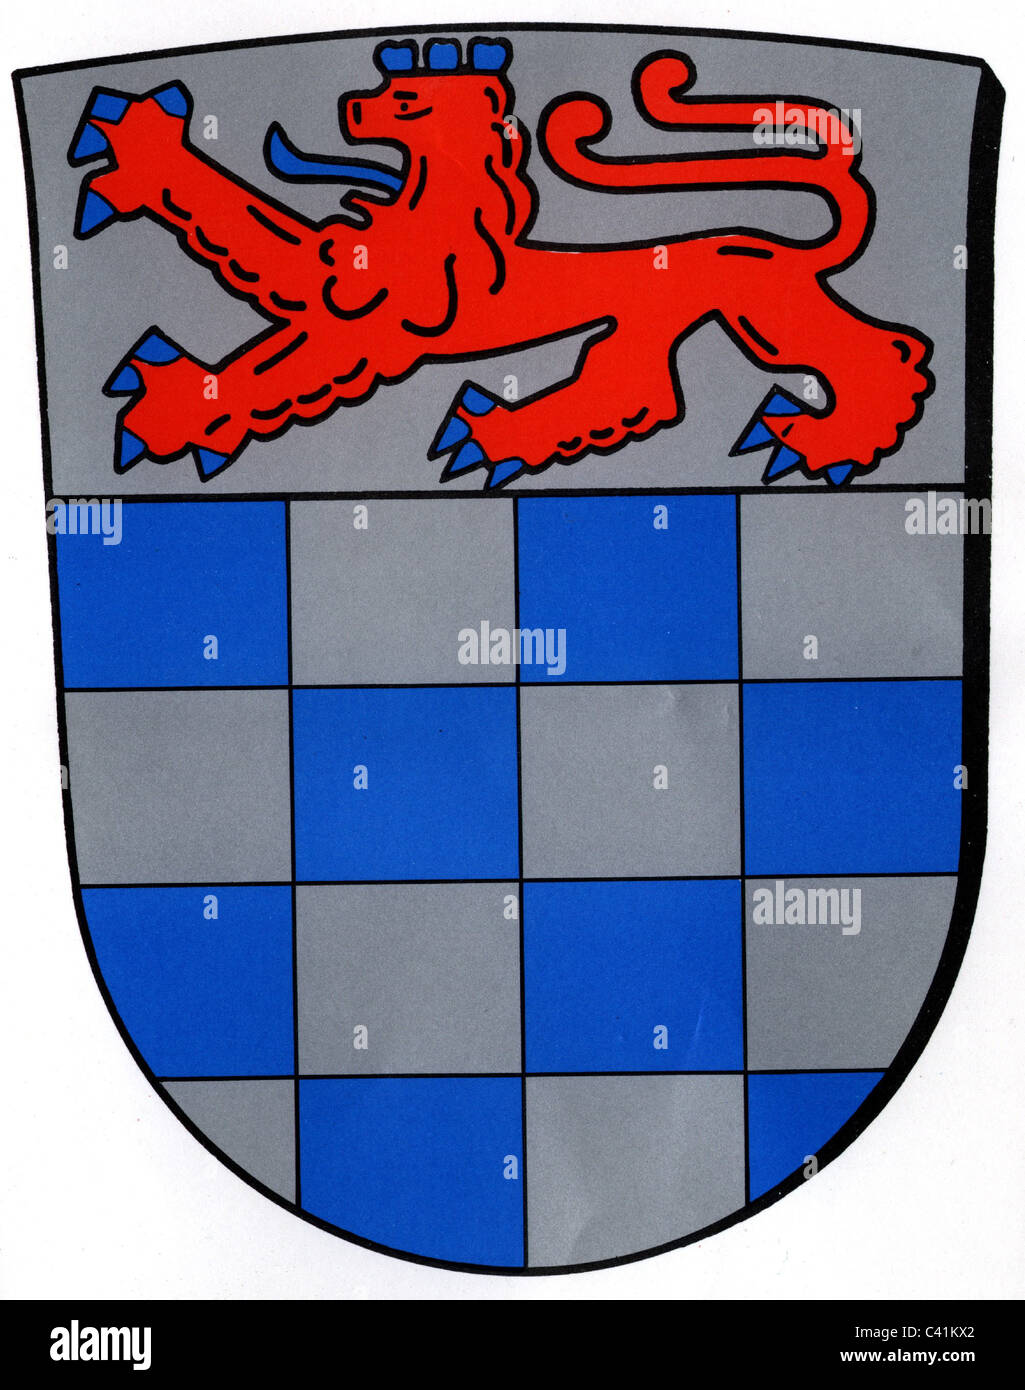 coat of arms / emblems, Sankt Augustin, city arms, North Rhine-Westphalia, Germany, Additional-Rights-Clearences-Not Available Stock Photo